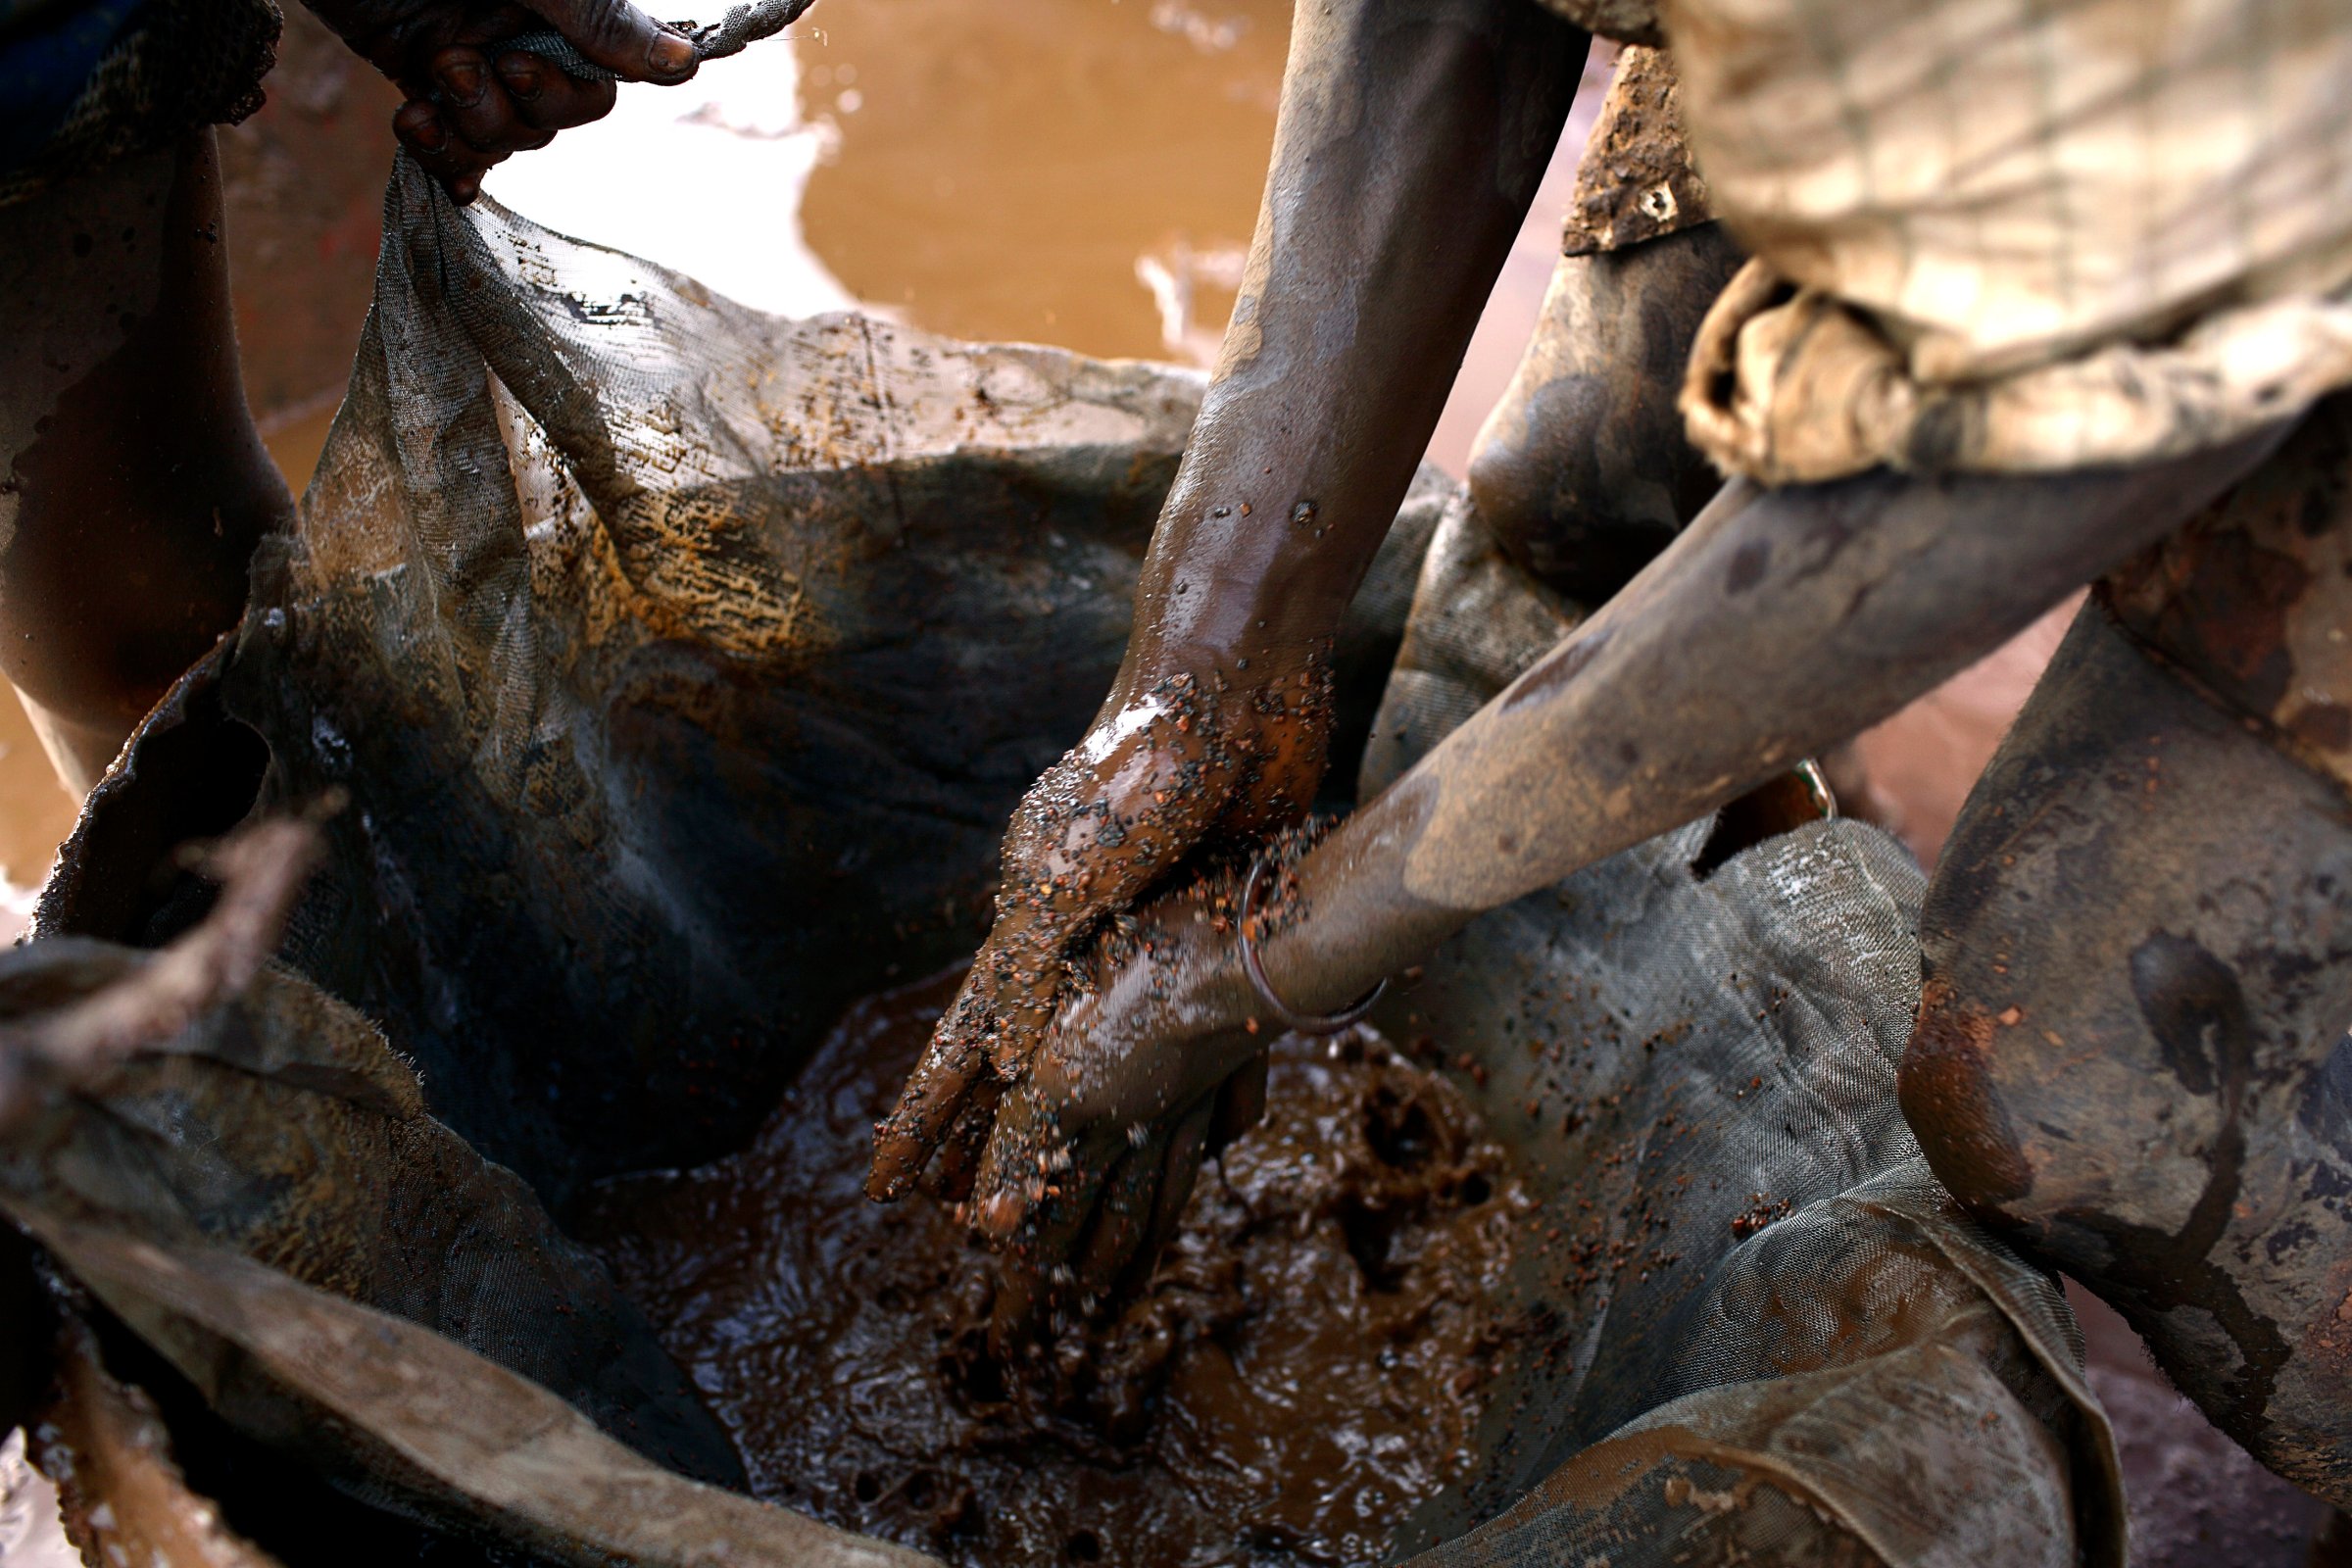 An unidentified young man cleans bags of cobalt from a cobalt mine in 2005 at Ruashi mine about 20 km outside Lubumbashi, the Democratic Republic of Congo.